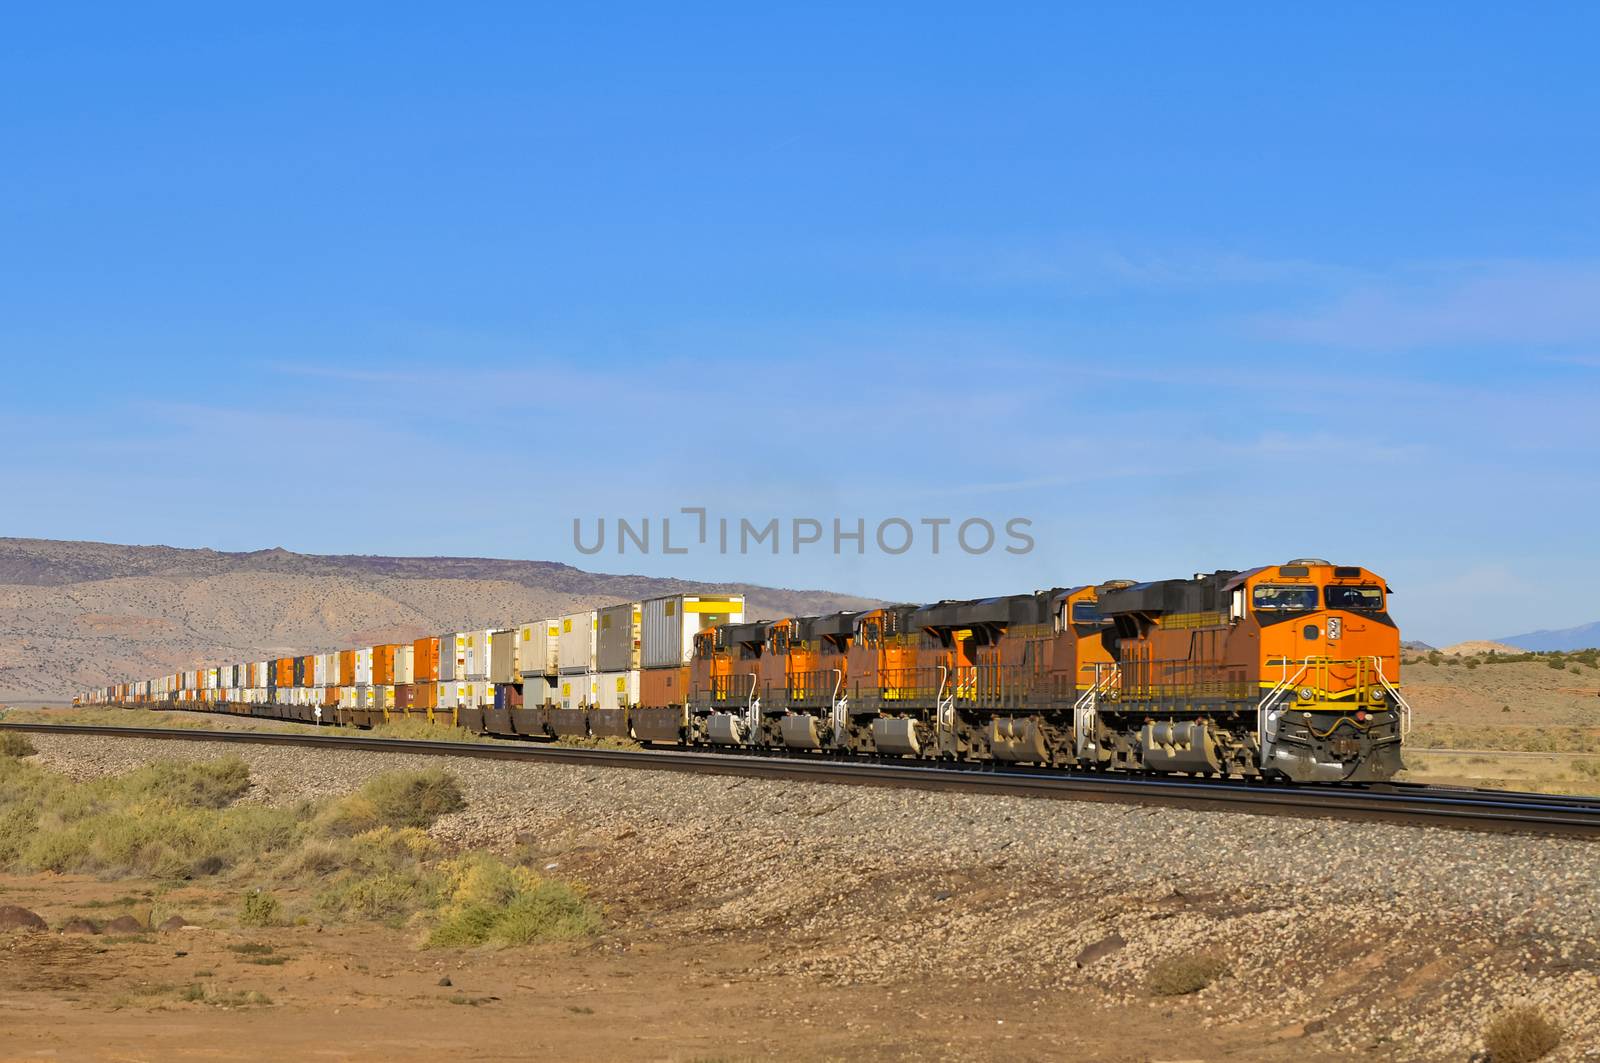 freight train with four locomotives and waggons full of containers in the desert, Arizona, USA